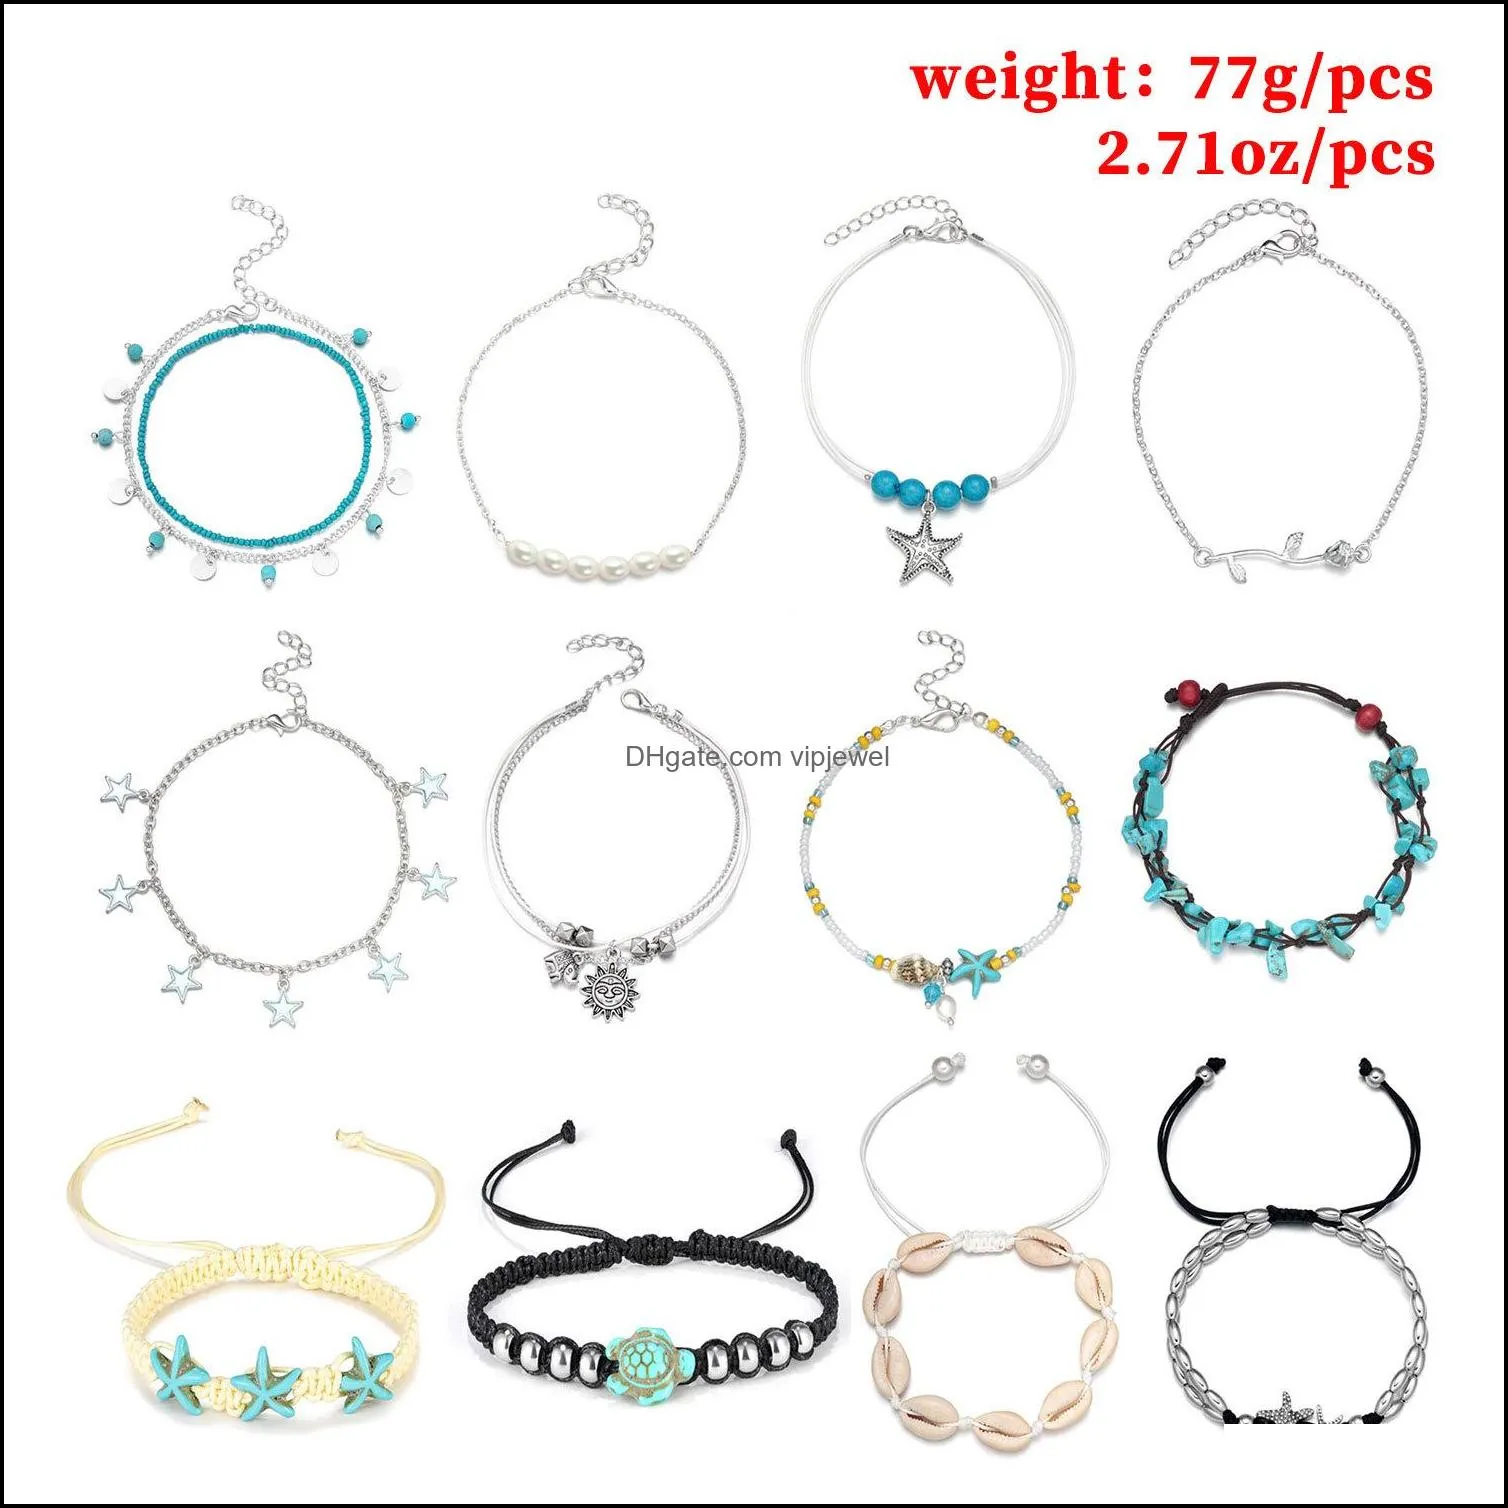 16 pieces foots ankle chains bracelets adjustable beach anklet foot jewelry set anklets for women girls barefoot